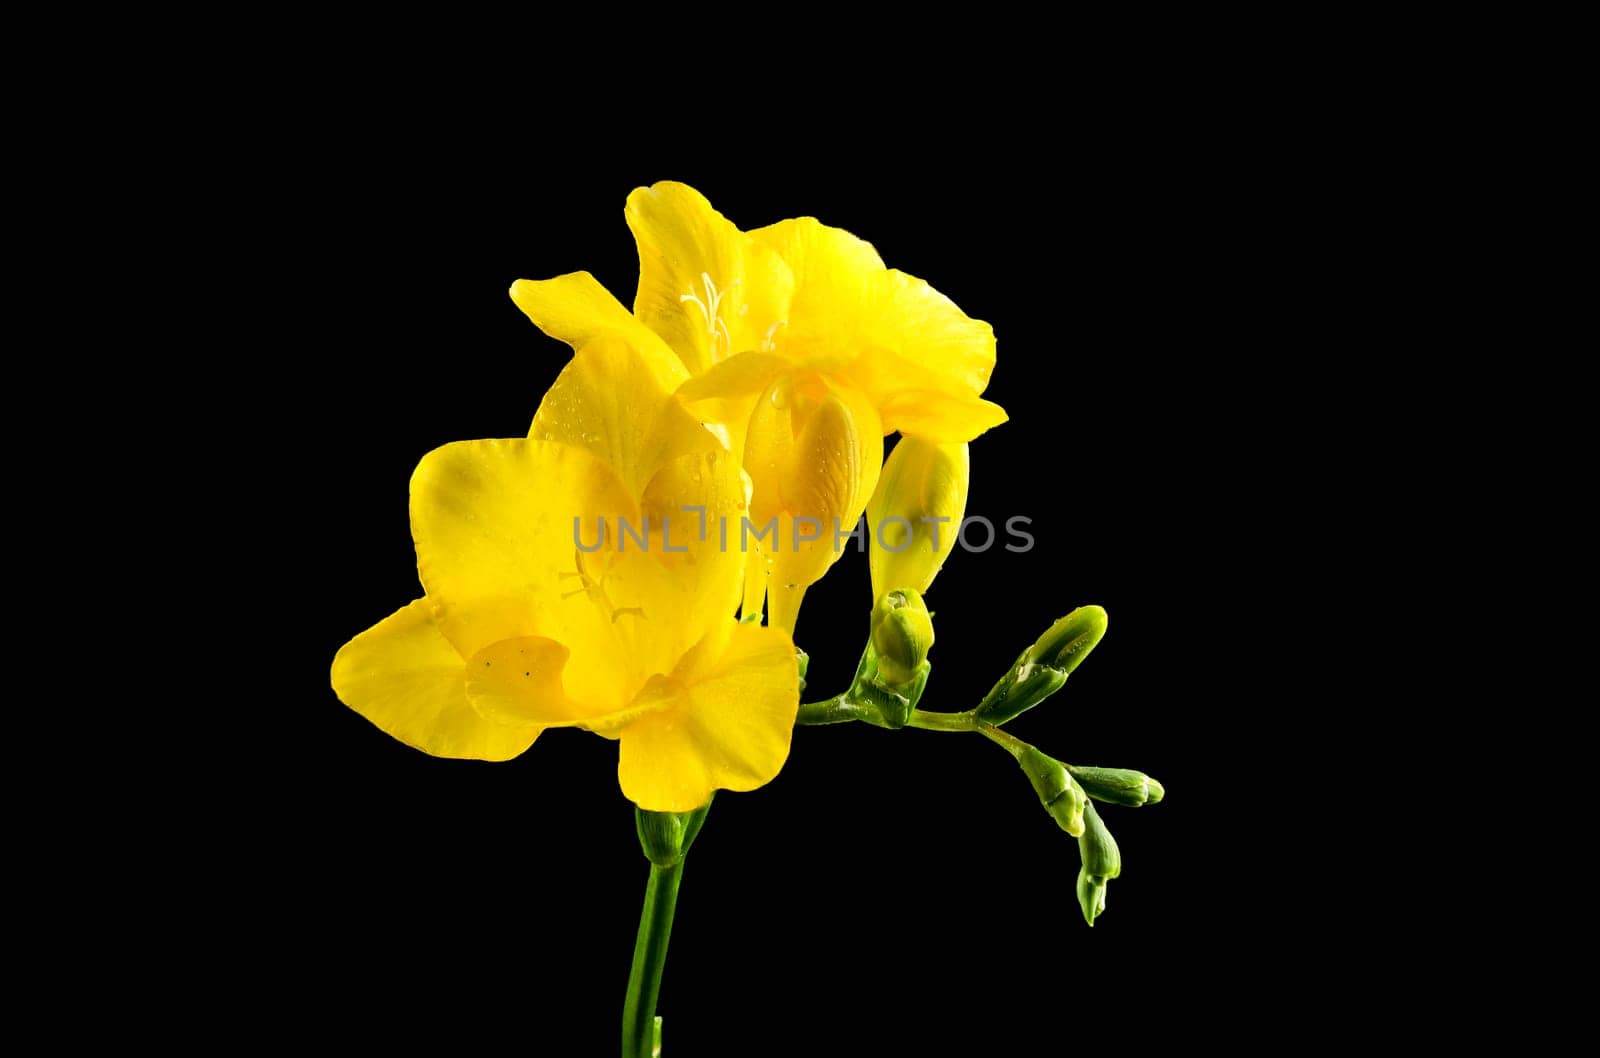 Yellow freesia flower on a black background by Multipedia